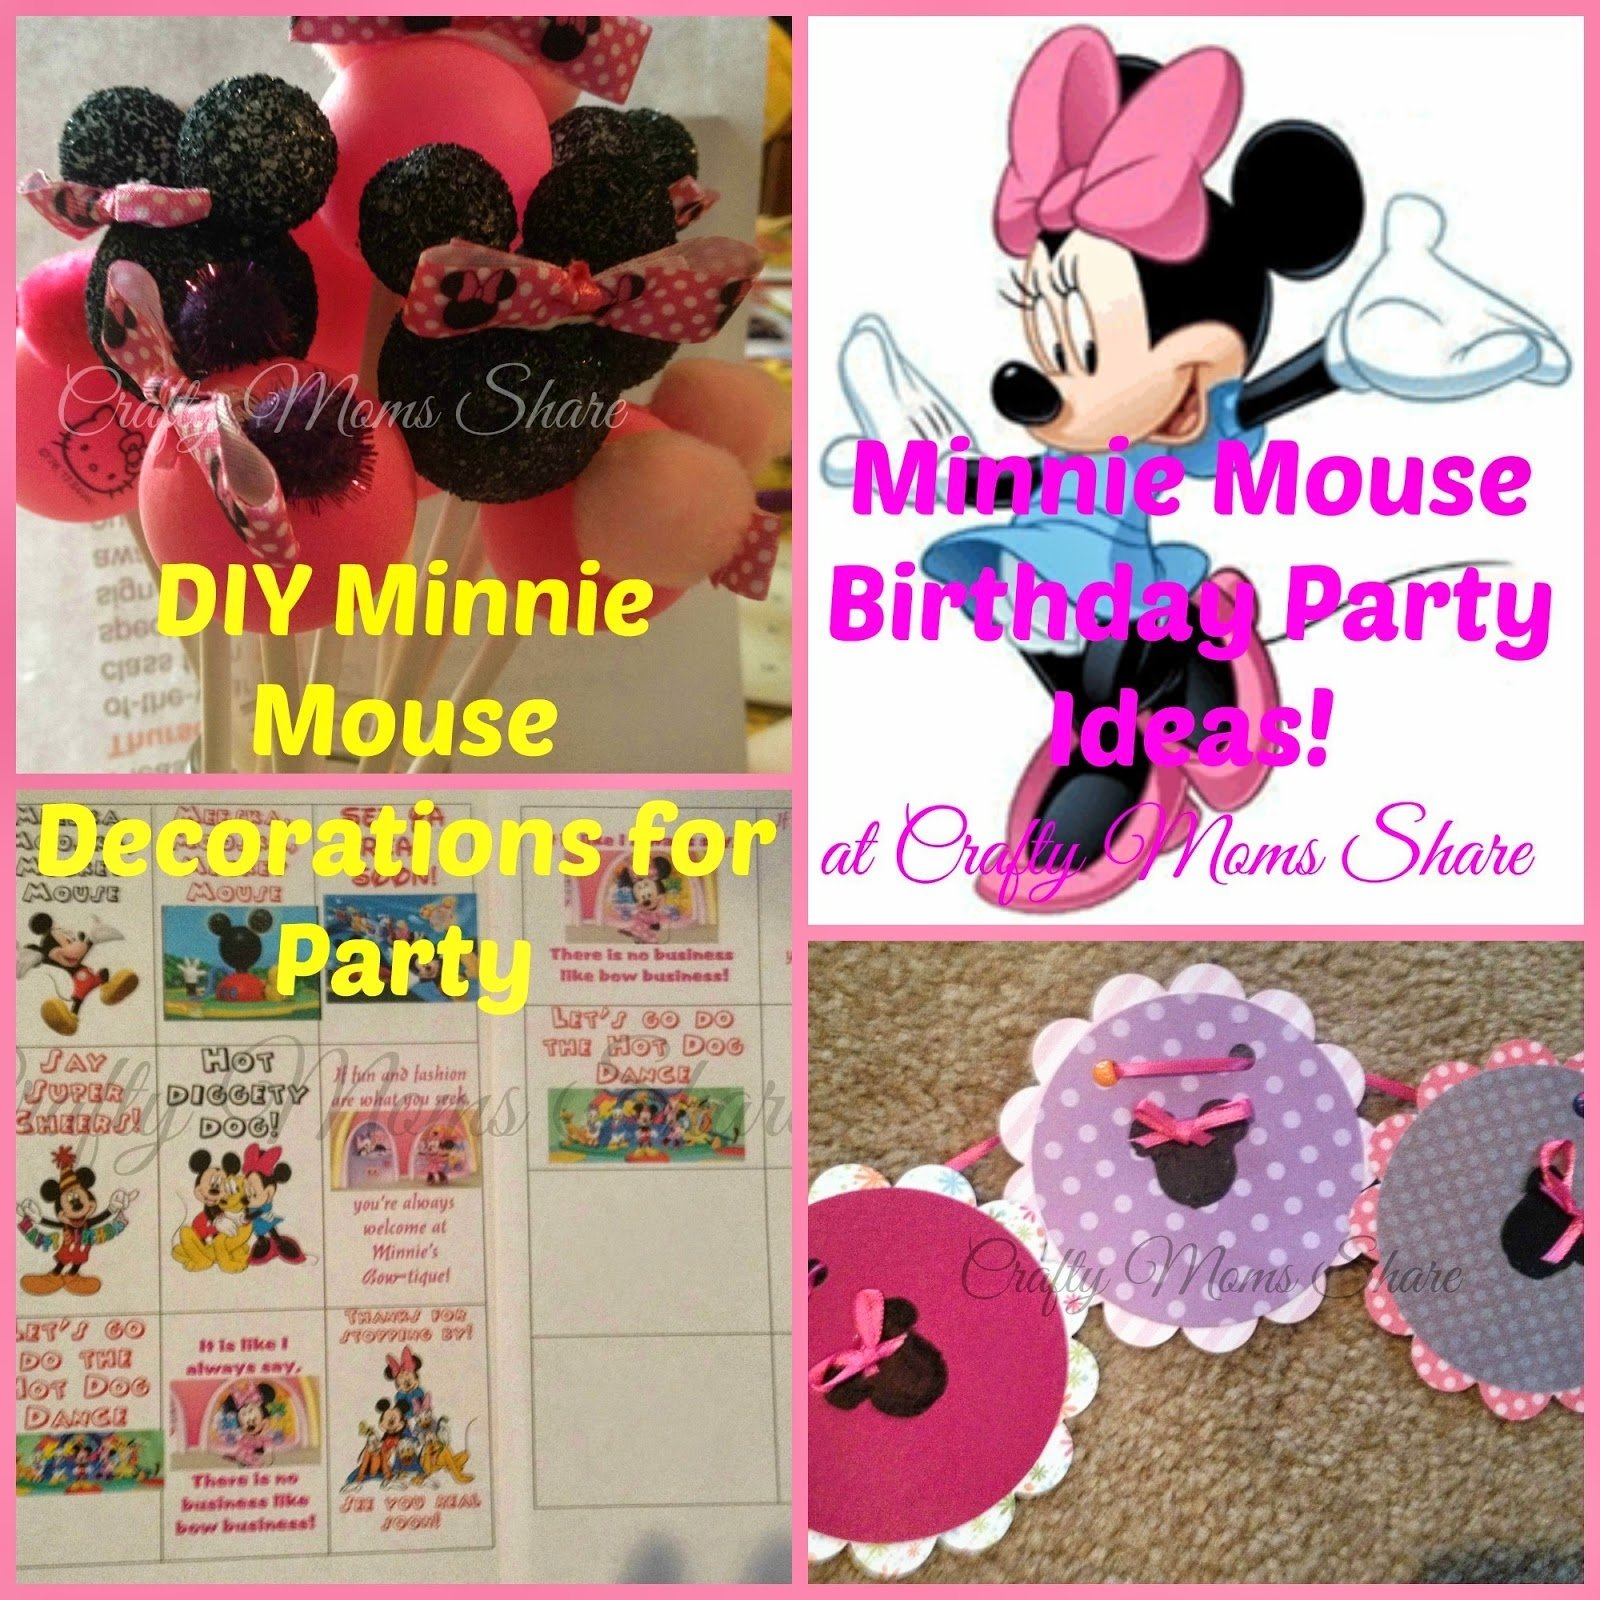 10 Famous Minnie Mouse Party Ideas Homemade crafty moms share minnie mouse birthday party diy decorations 3 2023